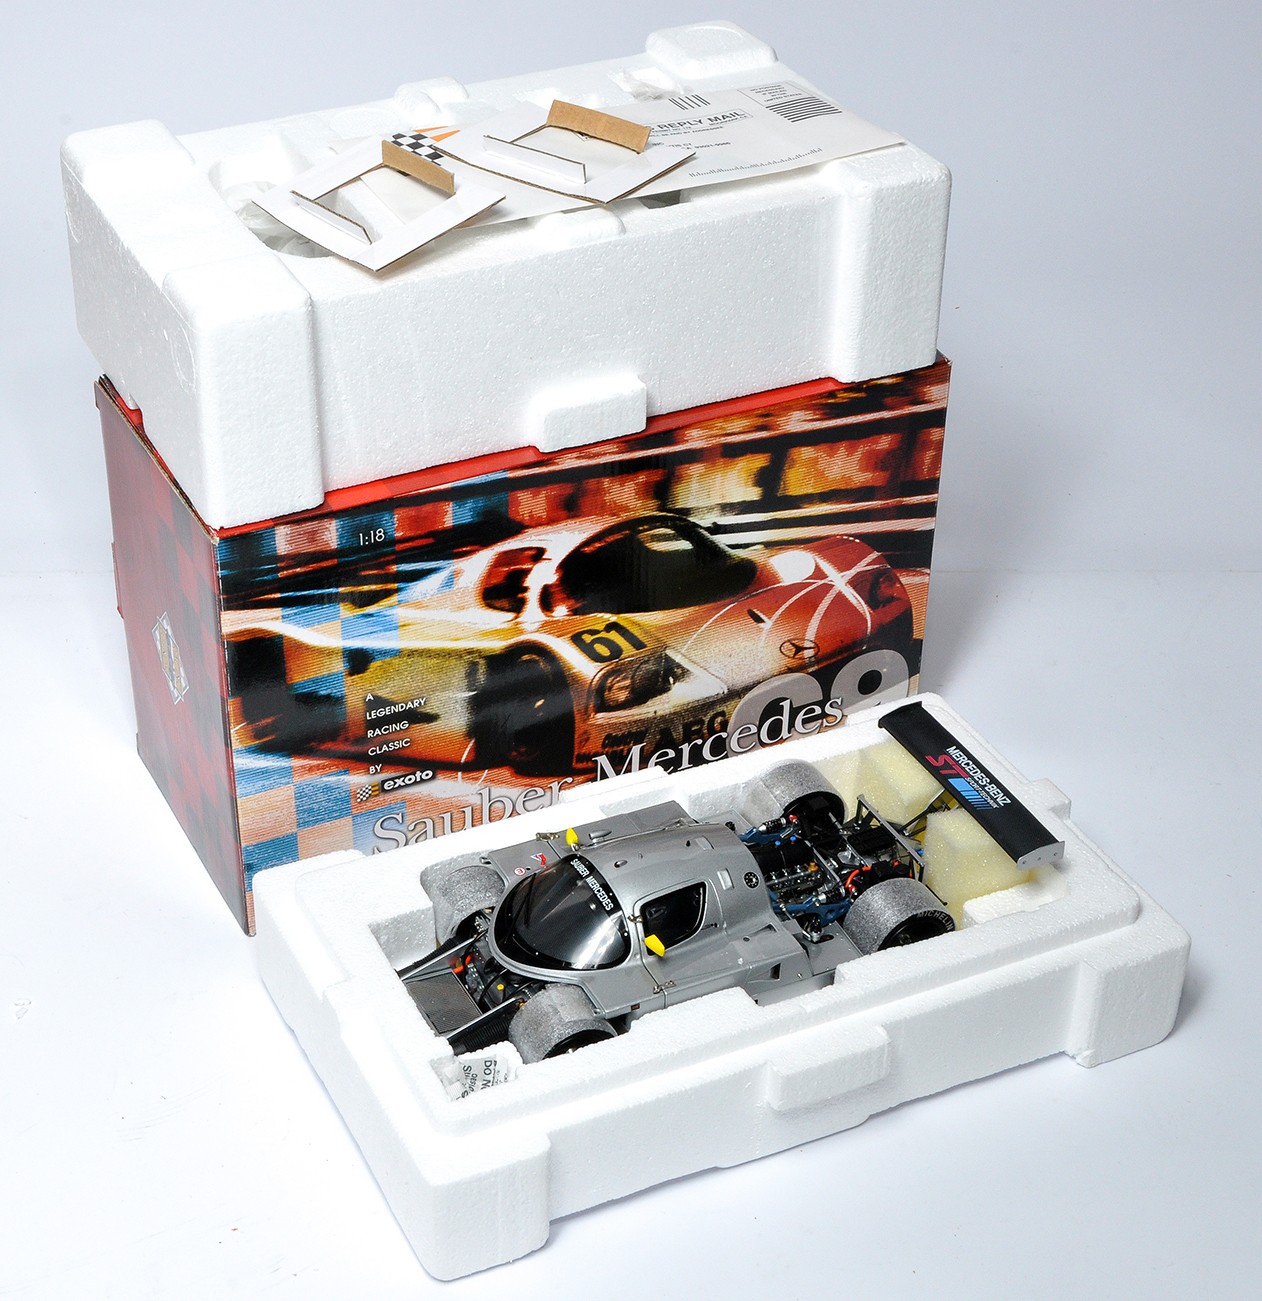 Exoto Racing Legends 1/18 diecast model racing car issue comprising Sauber Mercedes. Looks to be